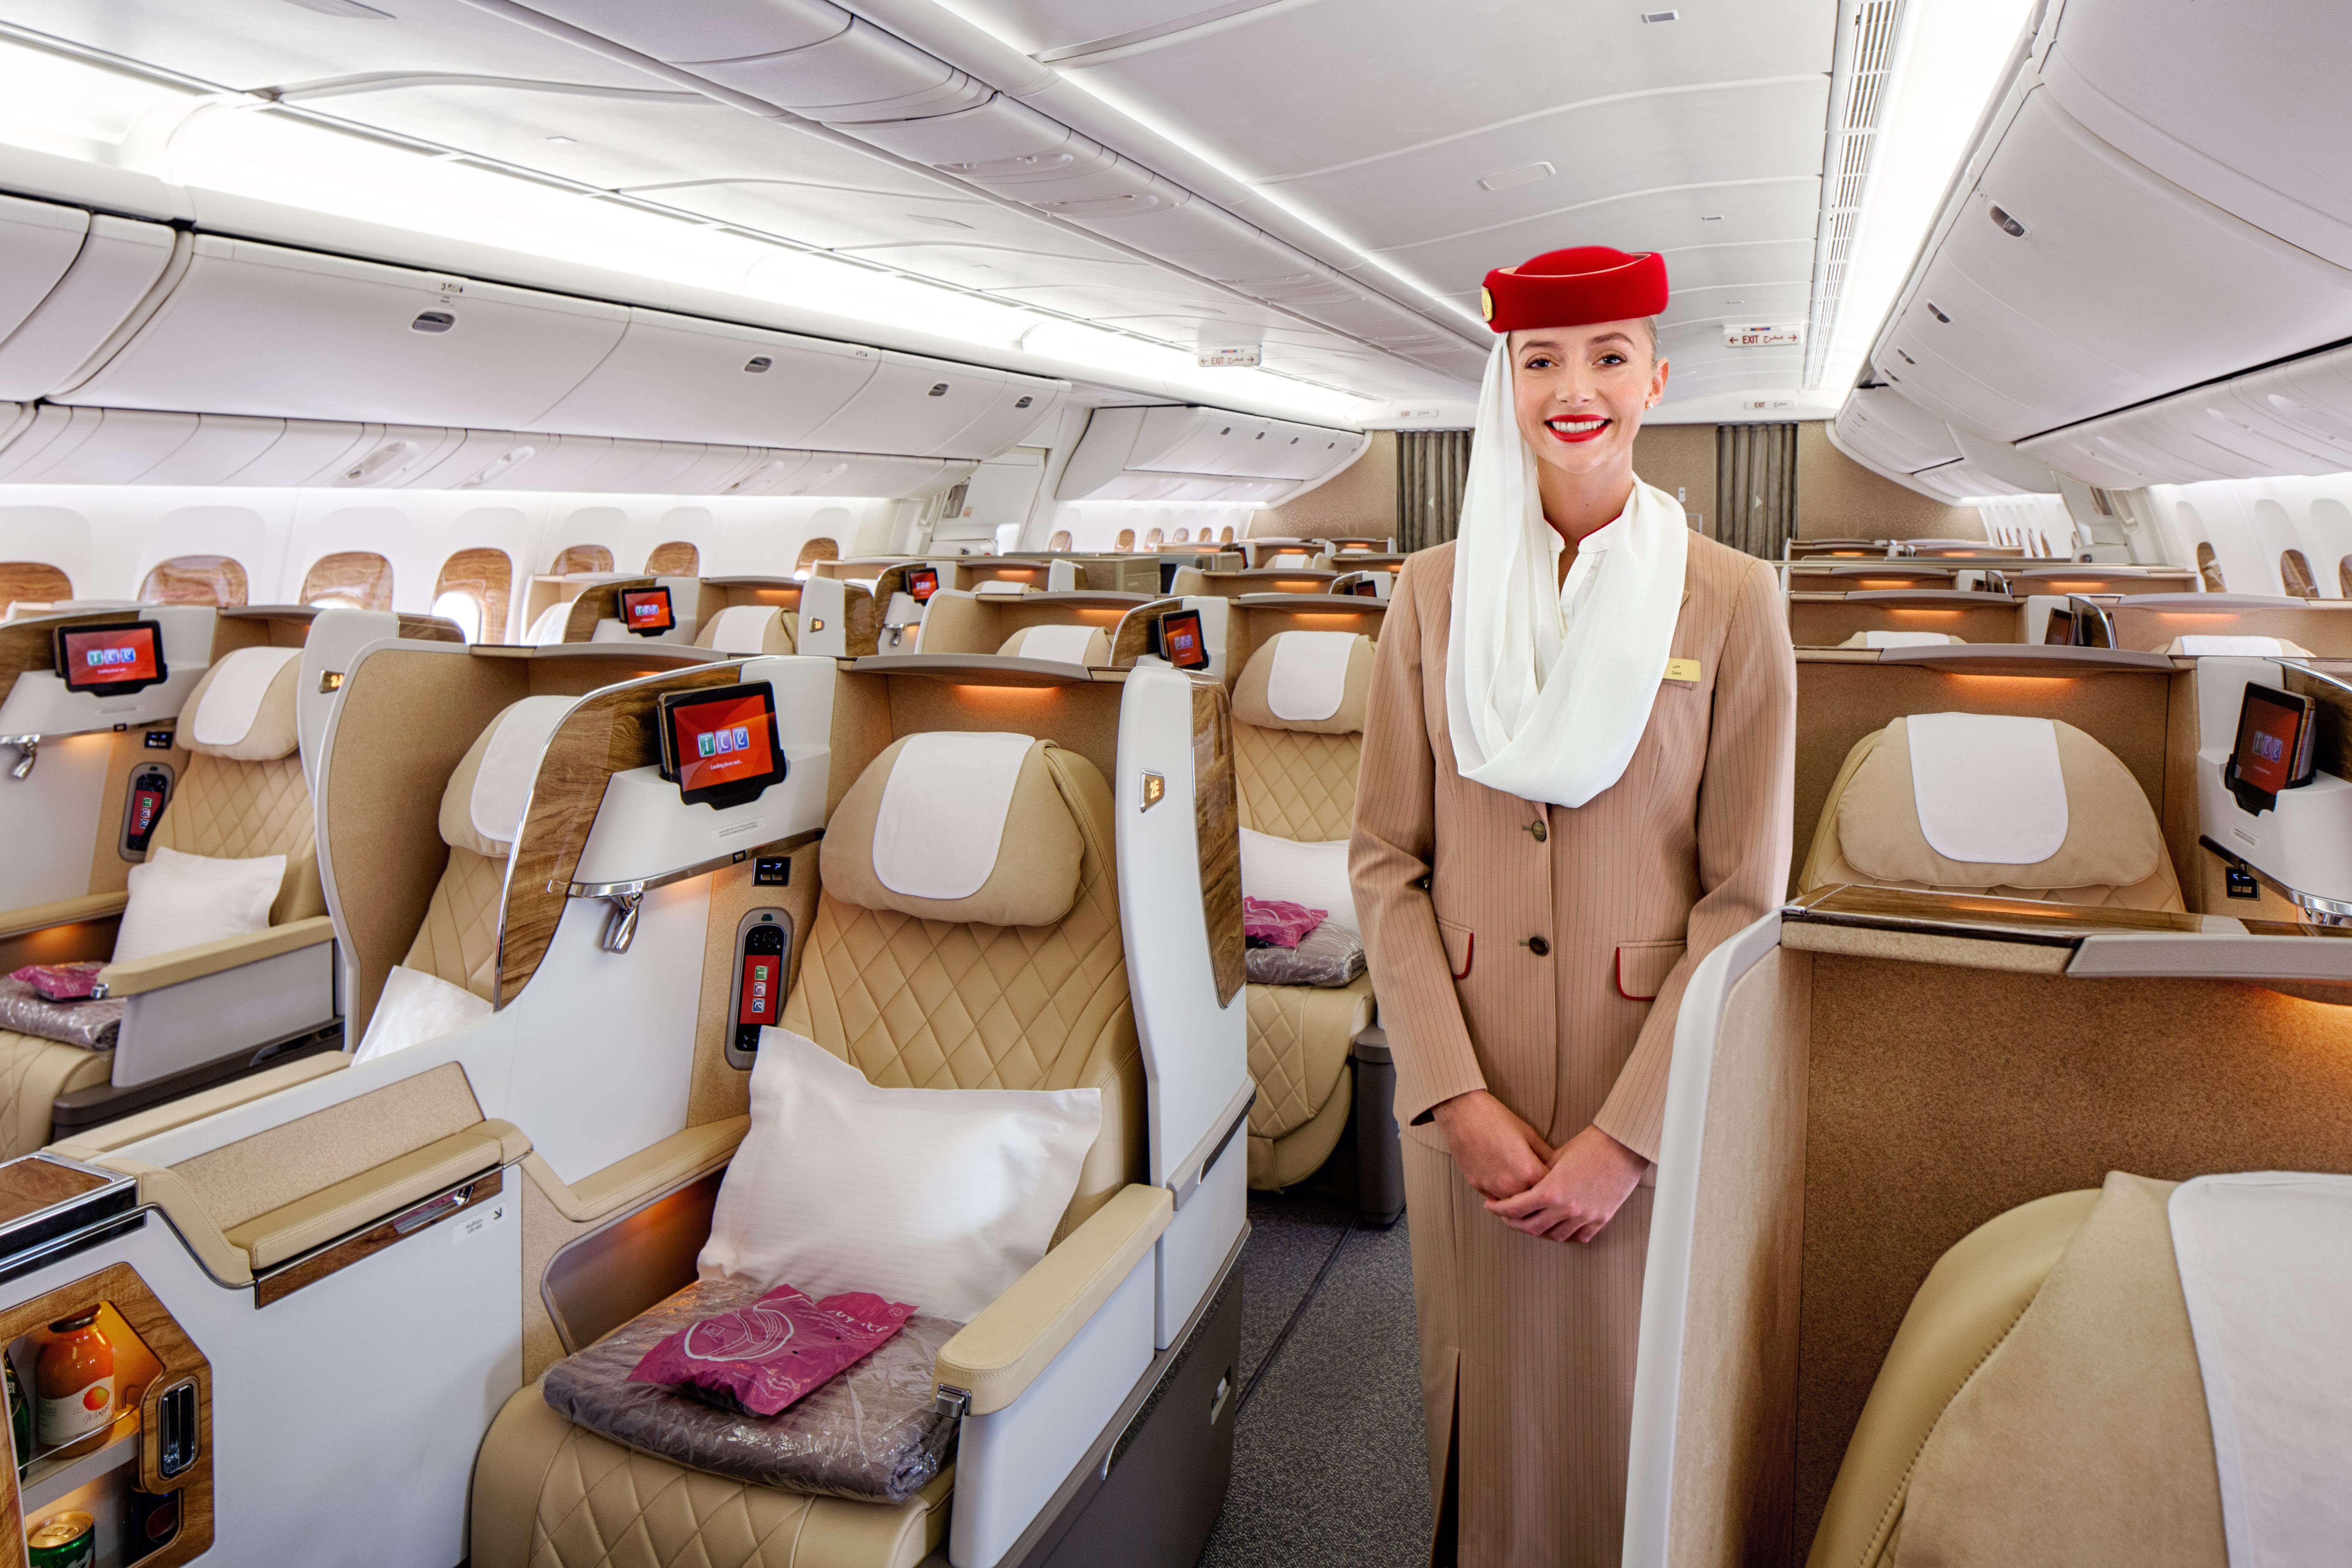 Emirates Unveils "New" Boeing 777 Business Class Cabin However